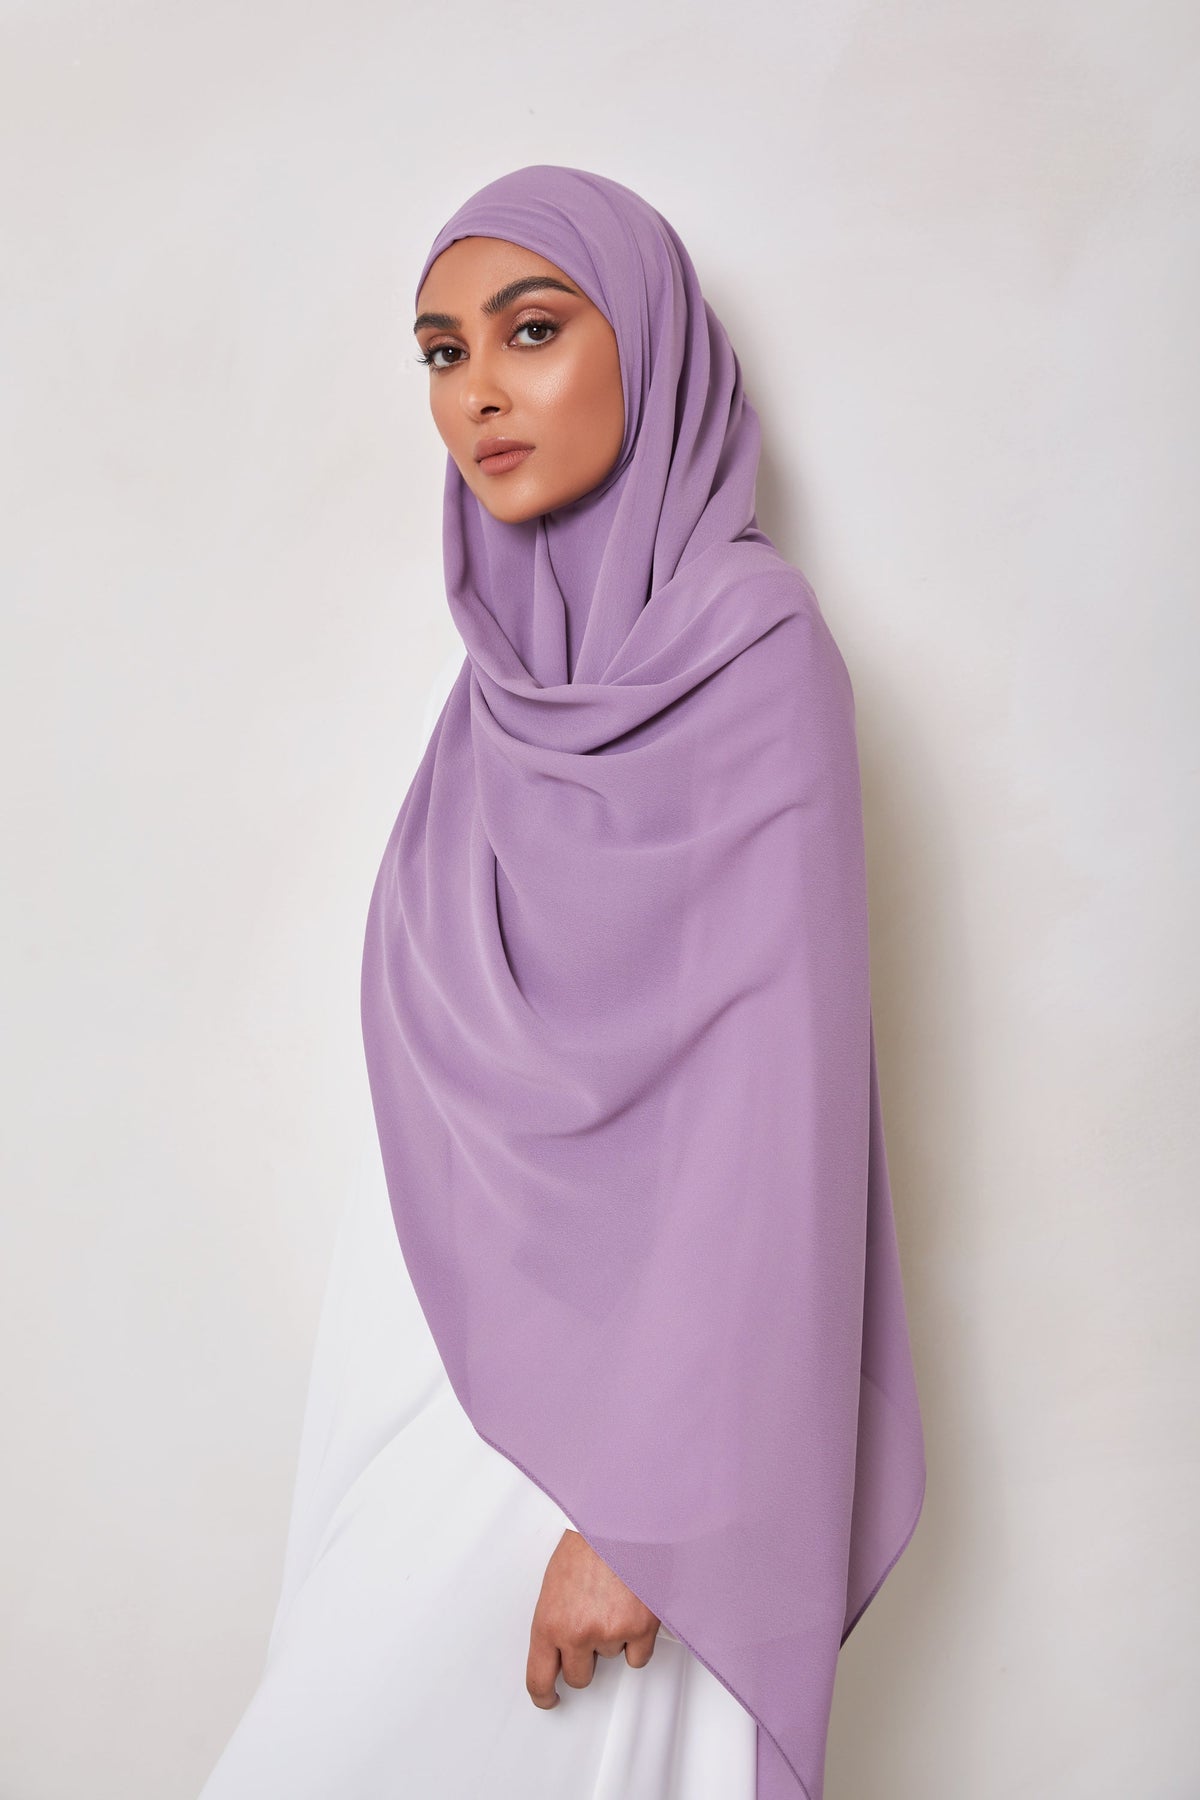 TEXTURE Everyday Chiffon Hijab - Poised in Purple Veiled Collection 